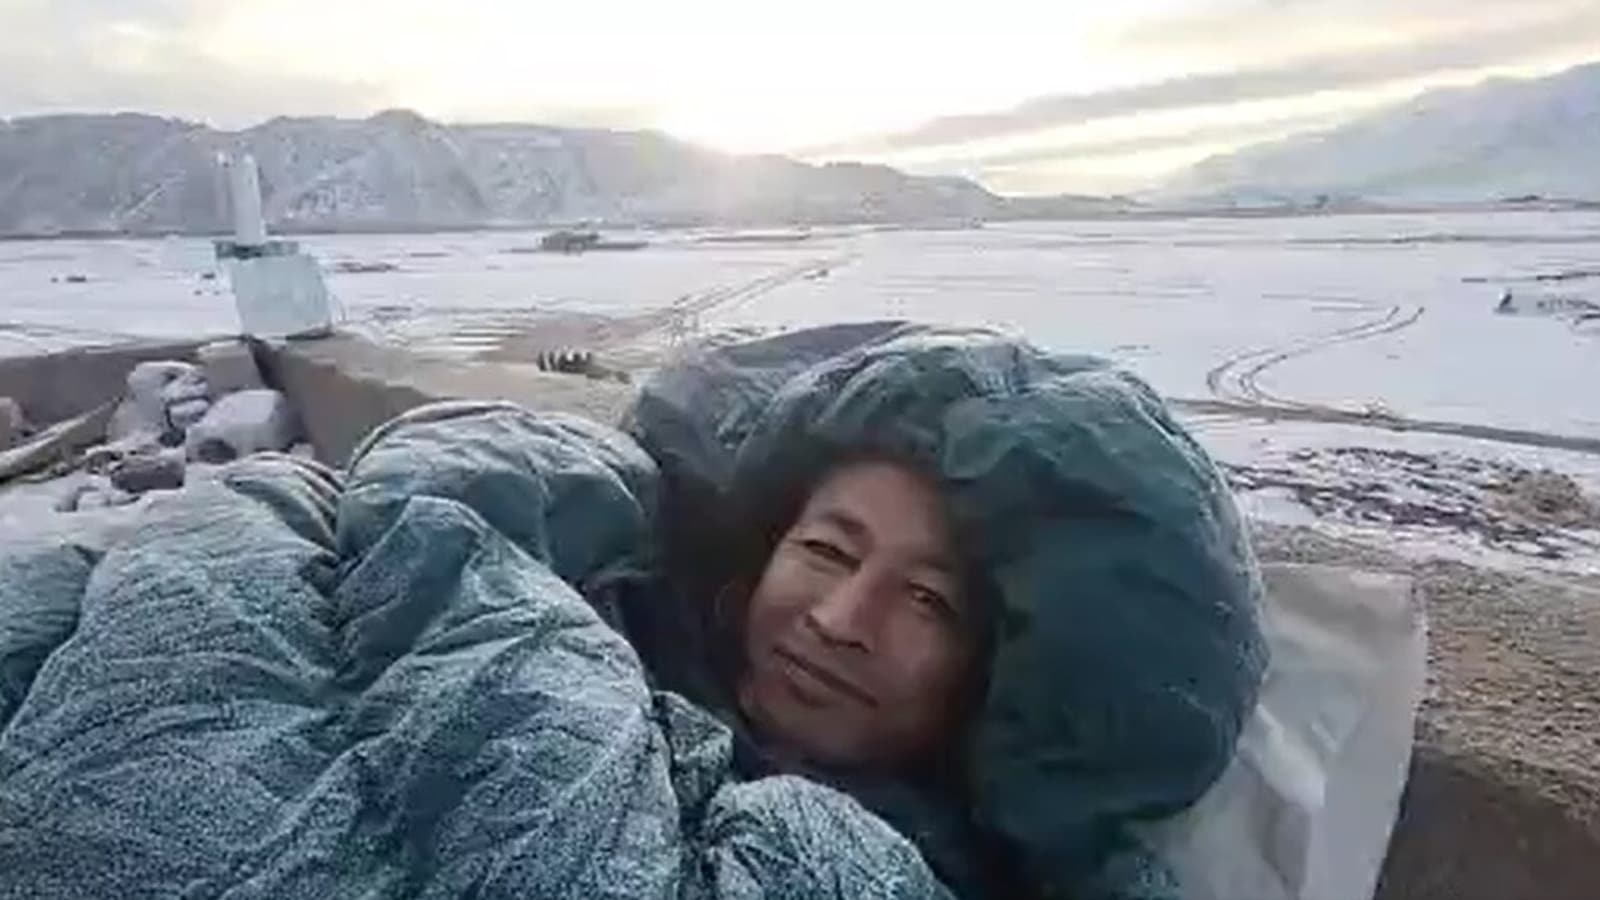 At -20 degrees, Sonam Wangchuk begins fast to 'save Ladakh', posts video | Latest News India - Hindustan Times